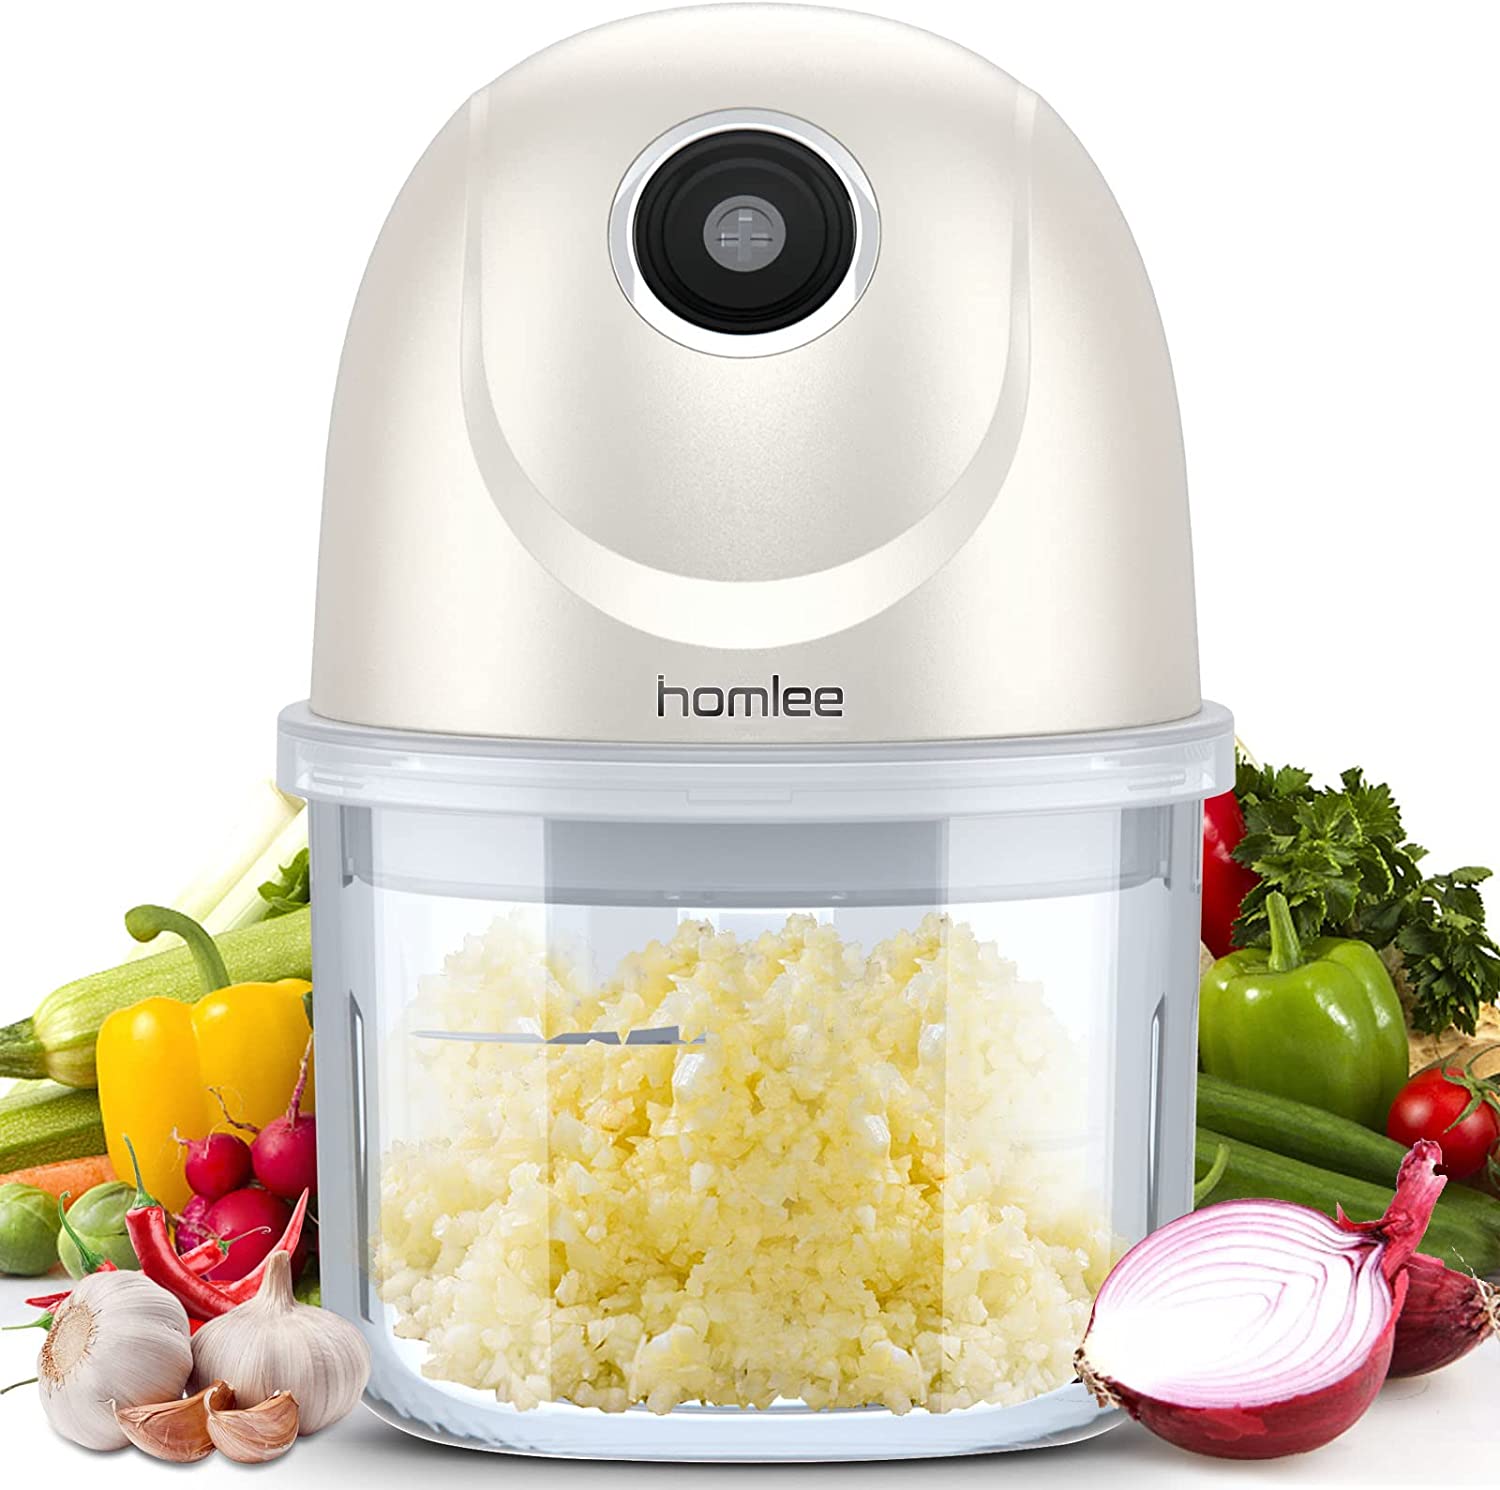 HOMLEE Electric Kitchen Chopper, 200 ml Mini Chopper, Wireless Kitchen Processor for Cutting Fruit, Onions, Garlic, Vegetables, Nuts, Meat, Portable Small Multi-Chopper